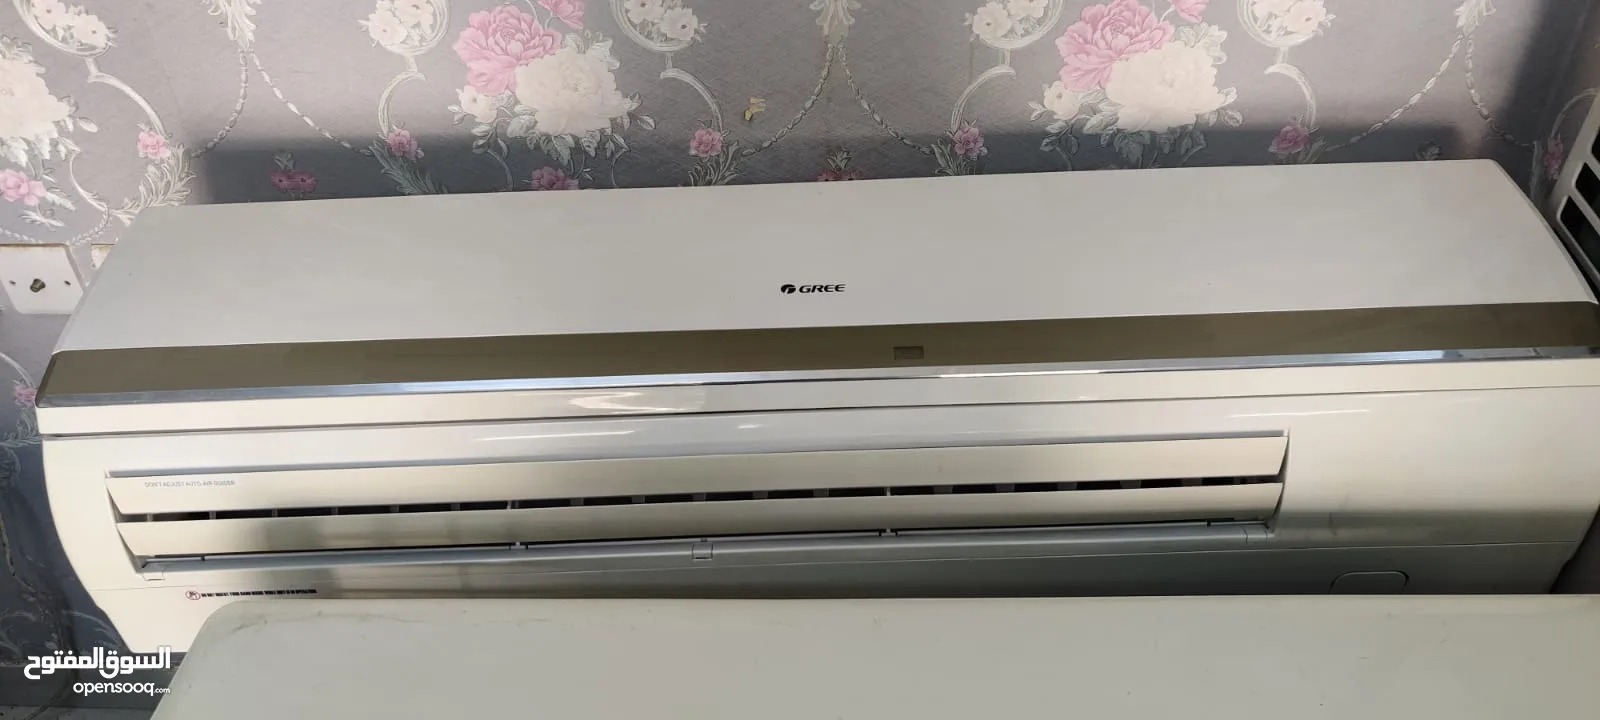 Used Ac But New Condition Very Good Working Everything ok Need and Clean